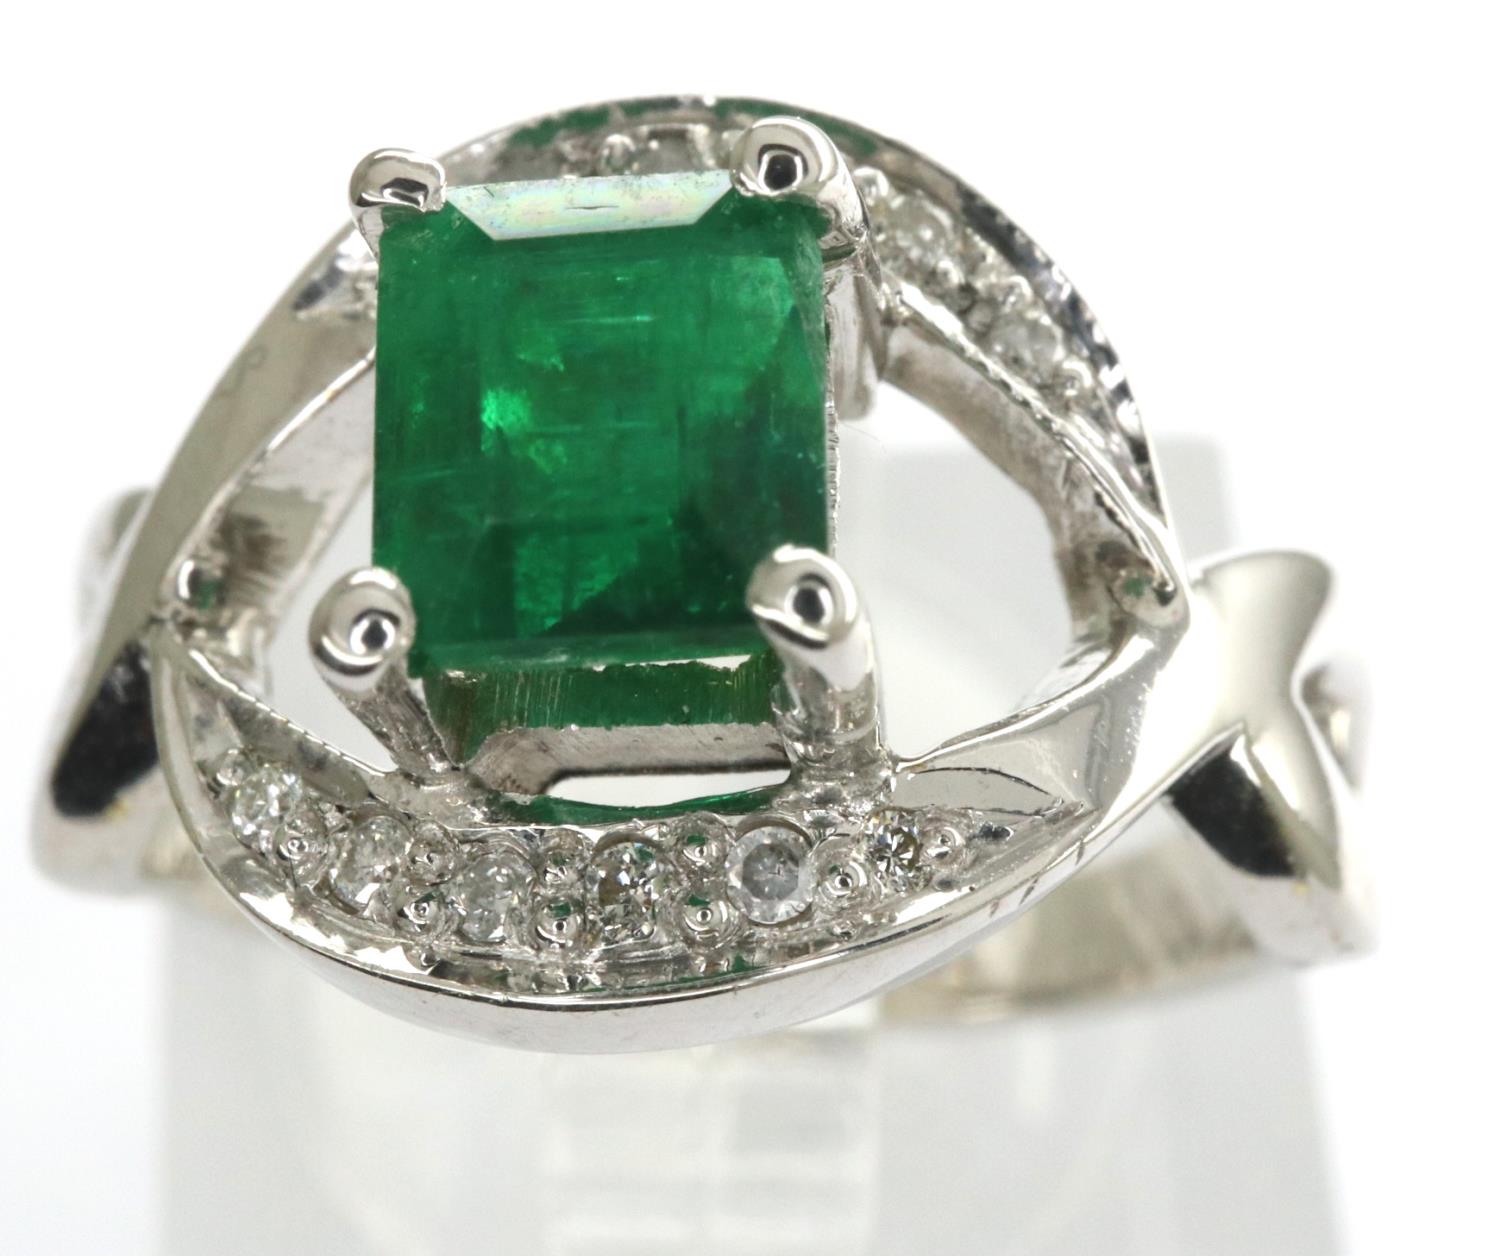 18ct white gold, emerald and diamond ring, size J, 4.4g. P&P Group 1 (£14+VAT for the first lot